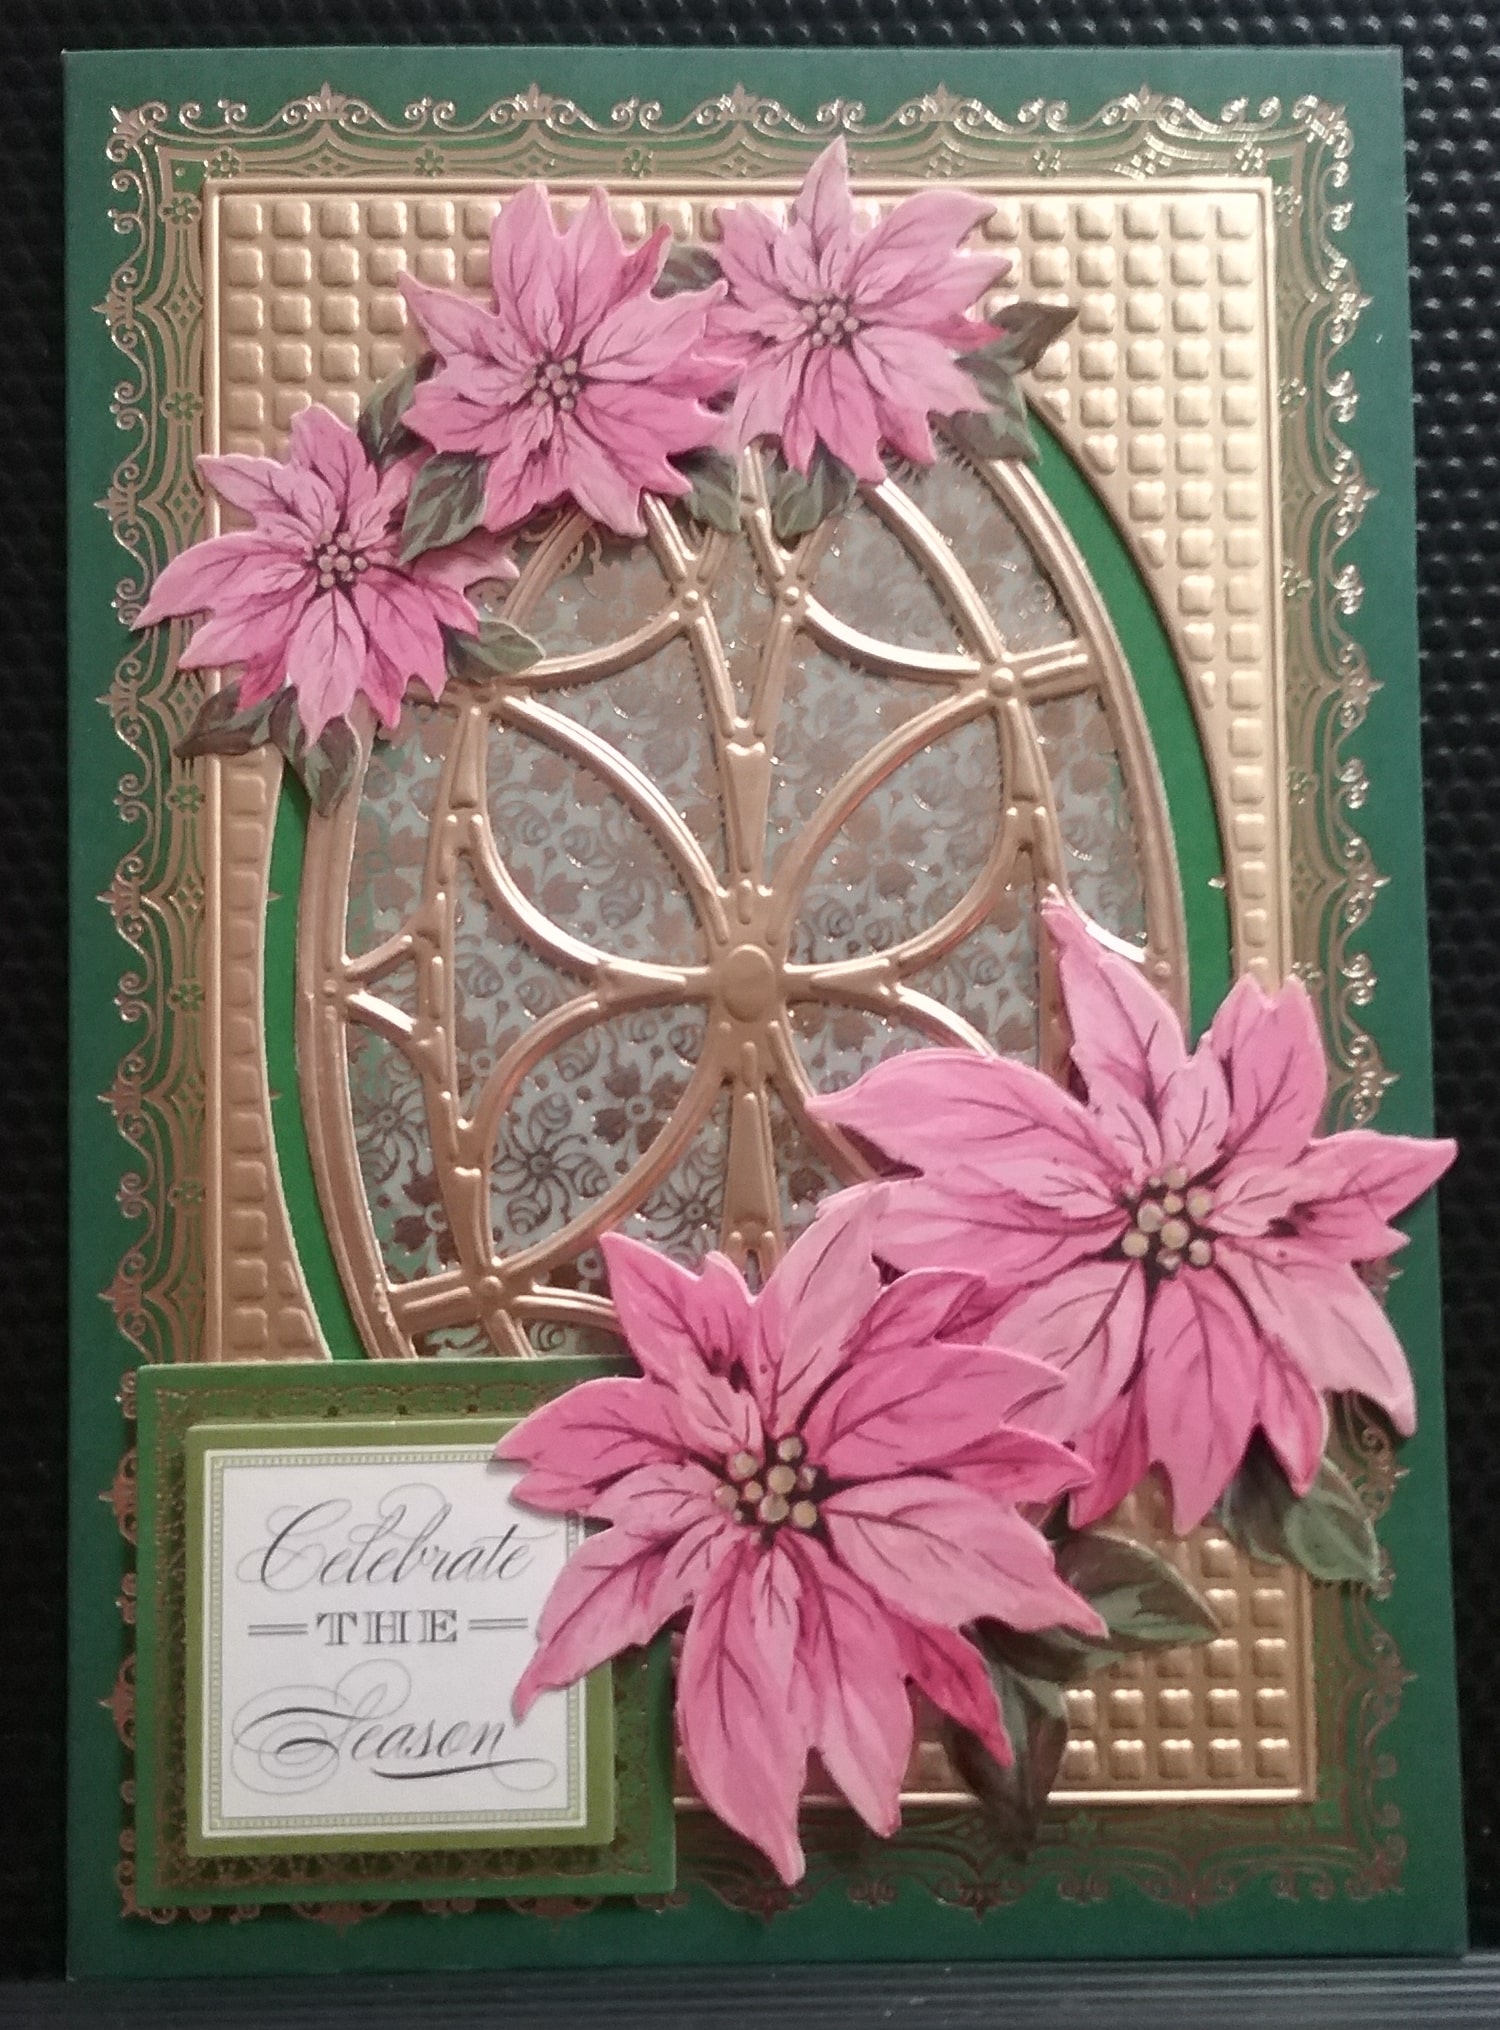 A card with pink poinsettias and a gold frame.